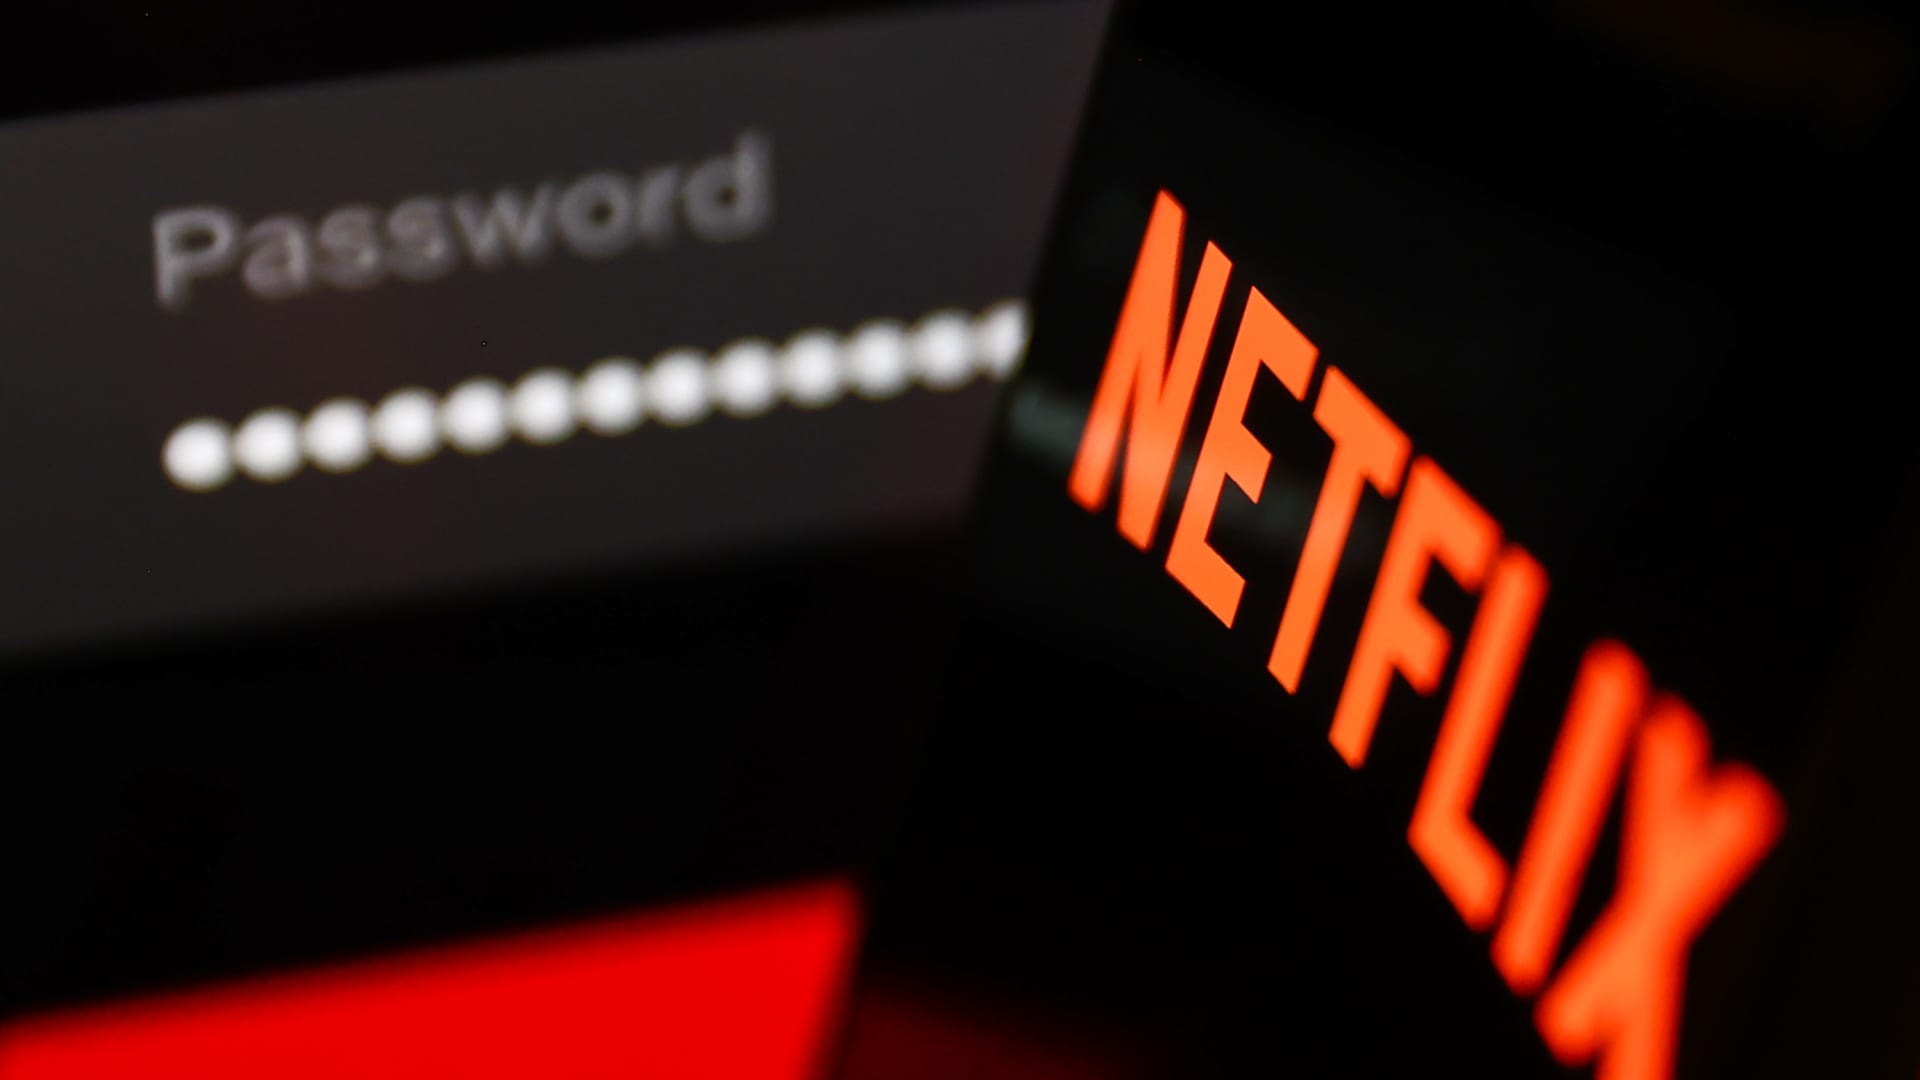 Netflix’s expected password-sharing crackdown puts college students on edge